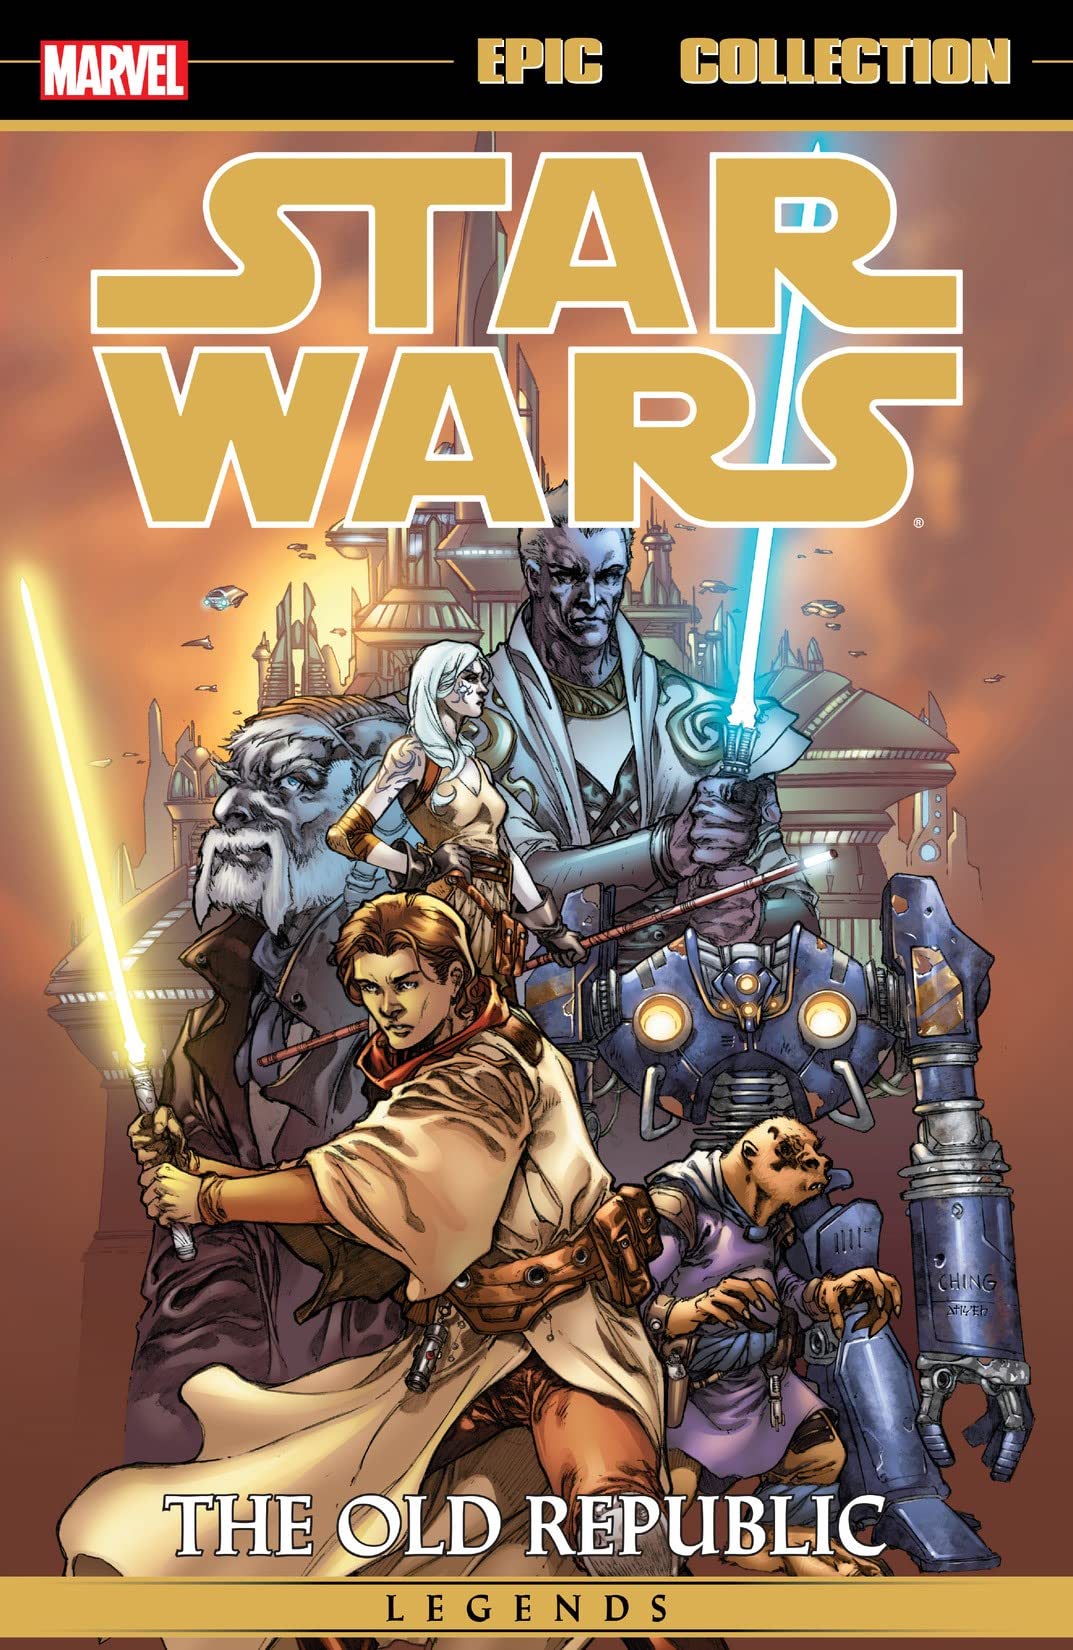 Star Wars Legends Epic Collection – The Old Republic Vol. 1